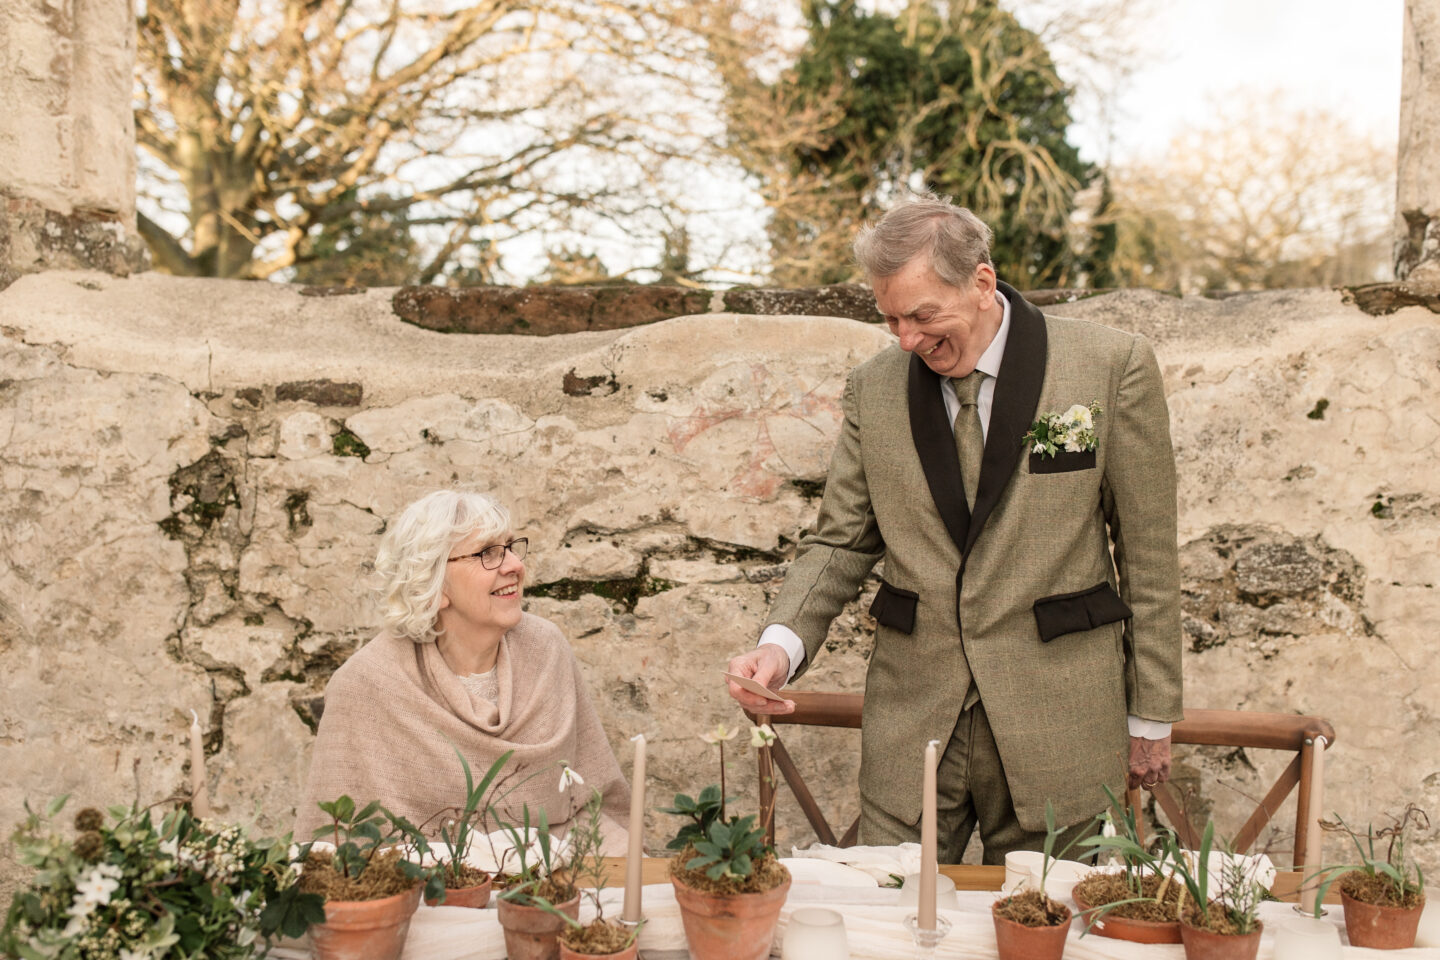 Eco-Friendly Vow Renewal at Clophill Eco Lodges Bedfordshire